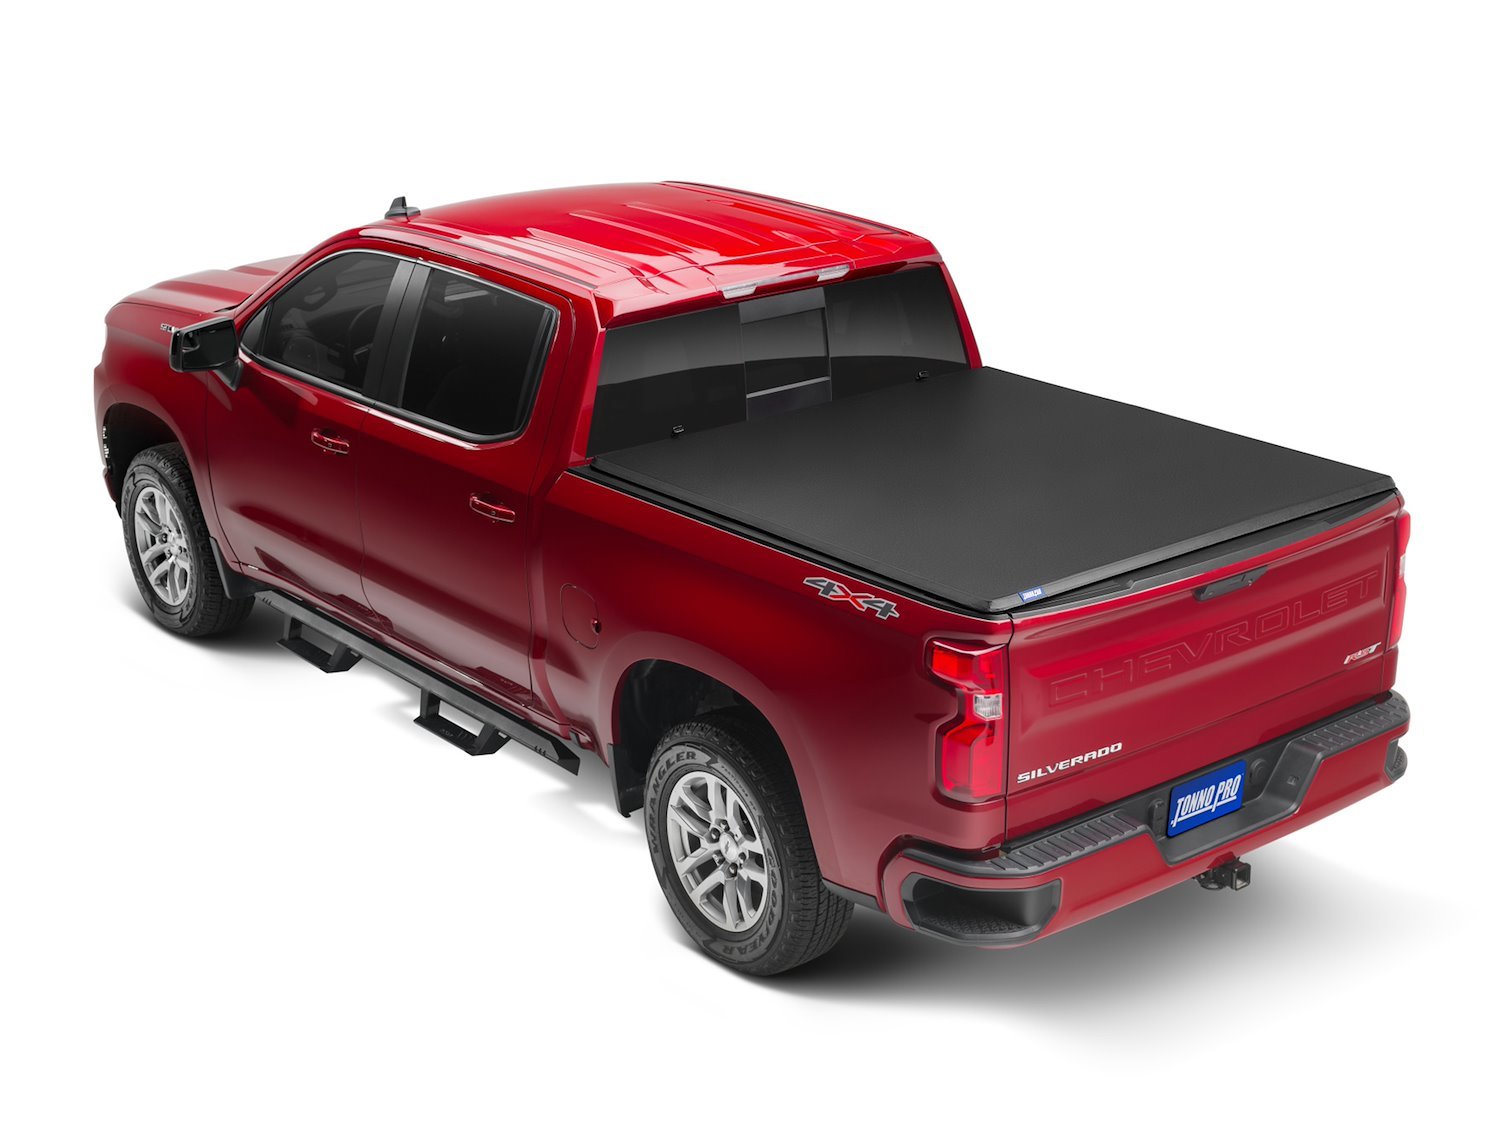 Hard Fold Tri-Fold Tonneau Cover Fits Select GM Silverado/Sierra 2500 HD, 3500 HD Trucks [6 ft. 10 in. Bed without Side Boxes]